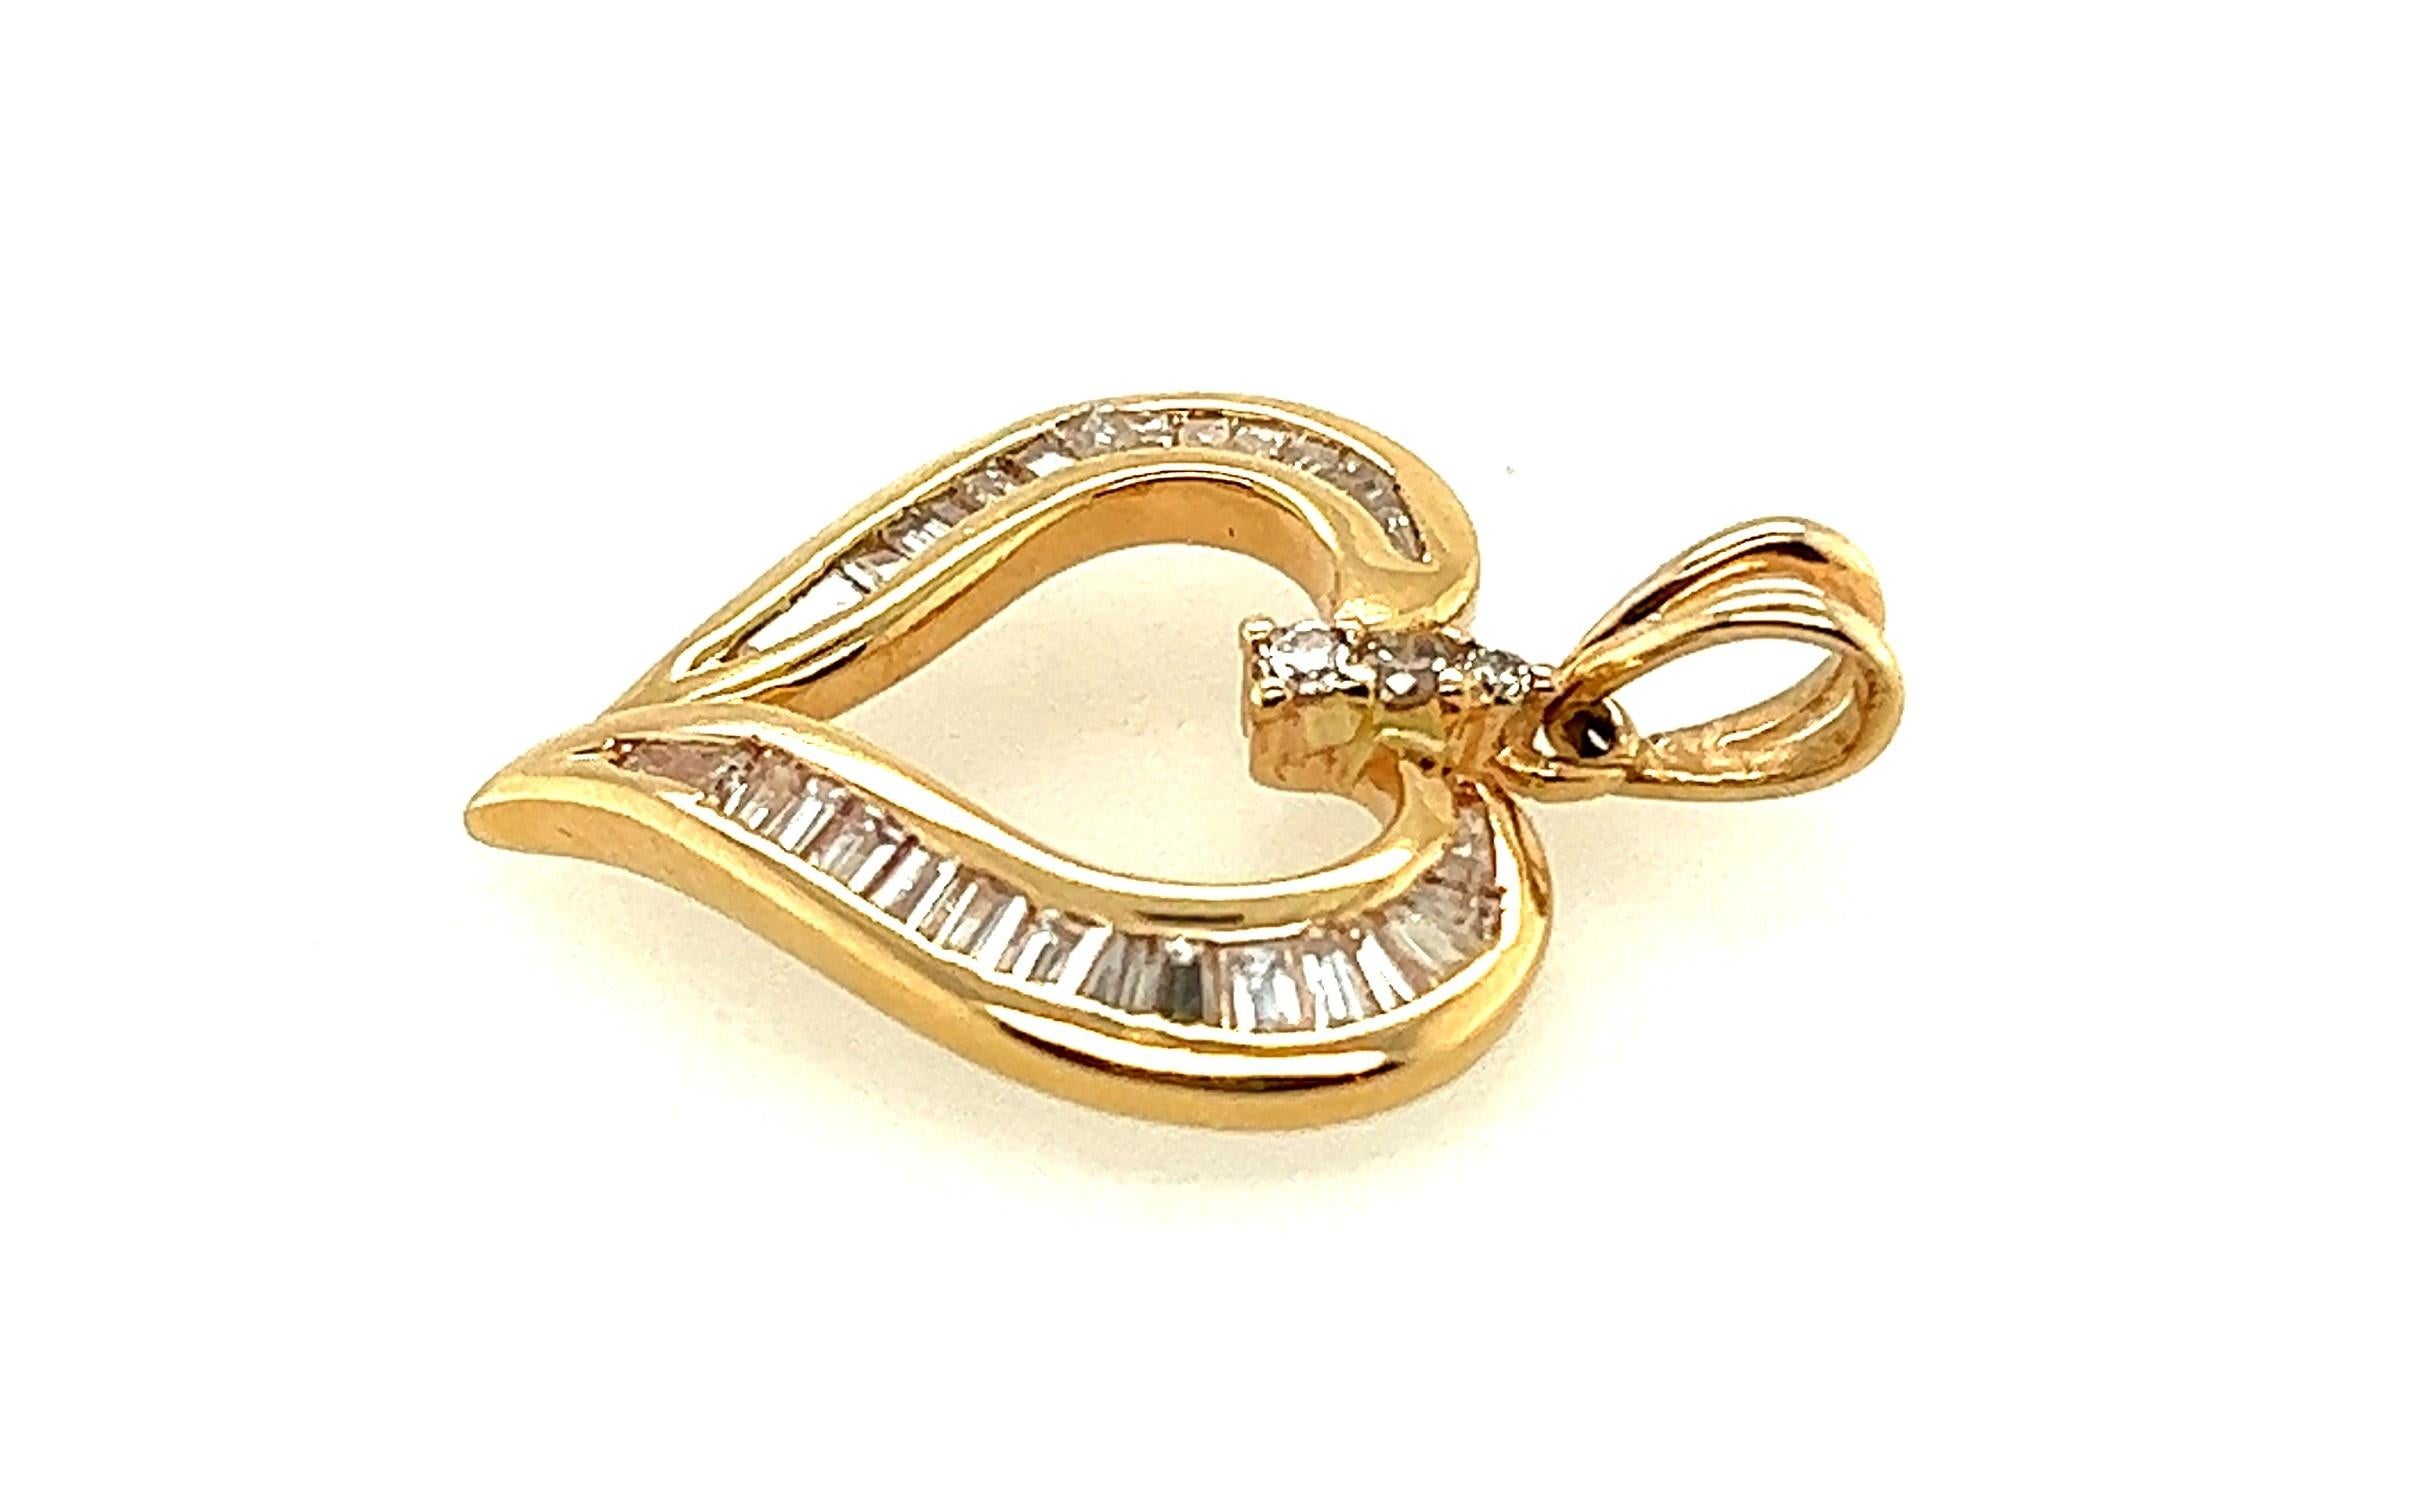 14kt yellow gold diamond heart pendant with approximately 1.00 carat of prong set round brilliant and channel set baguette cut diamonds. The diamonds appear to possess an average of H-I color and SI1-SI2 clarity.  

The pendant measures 1 and 1/16